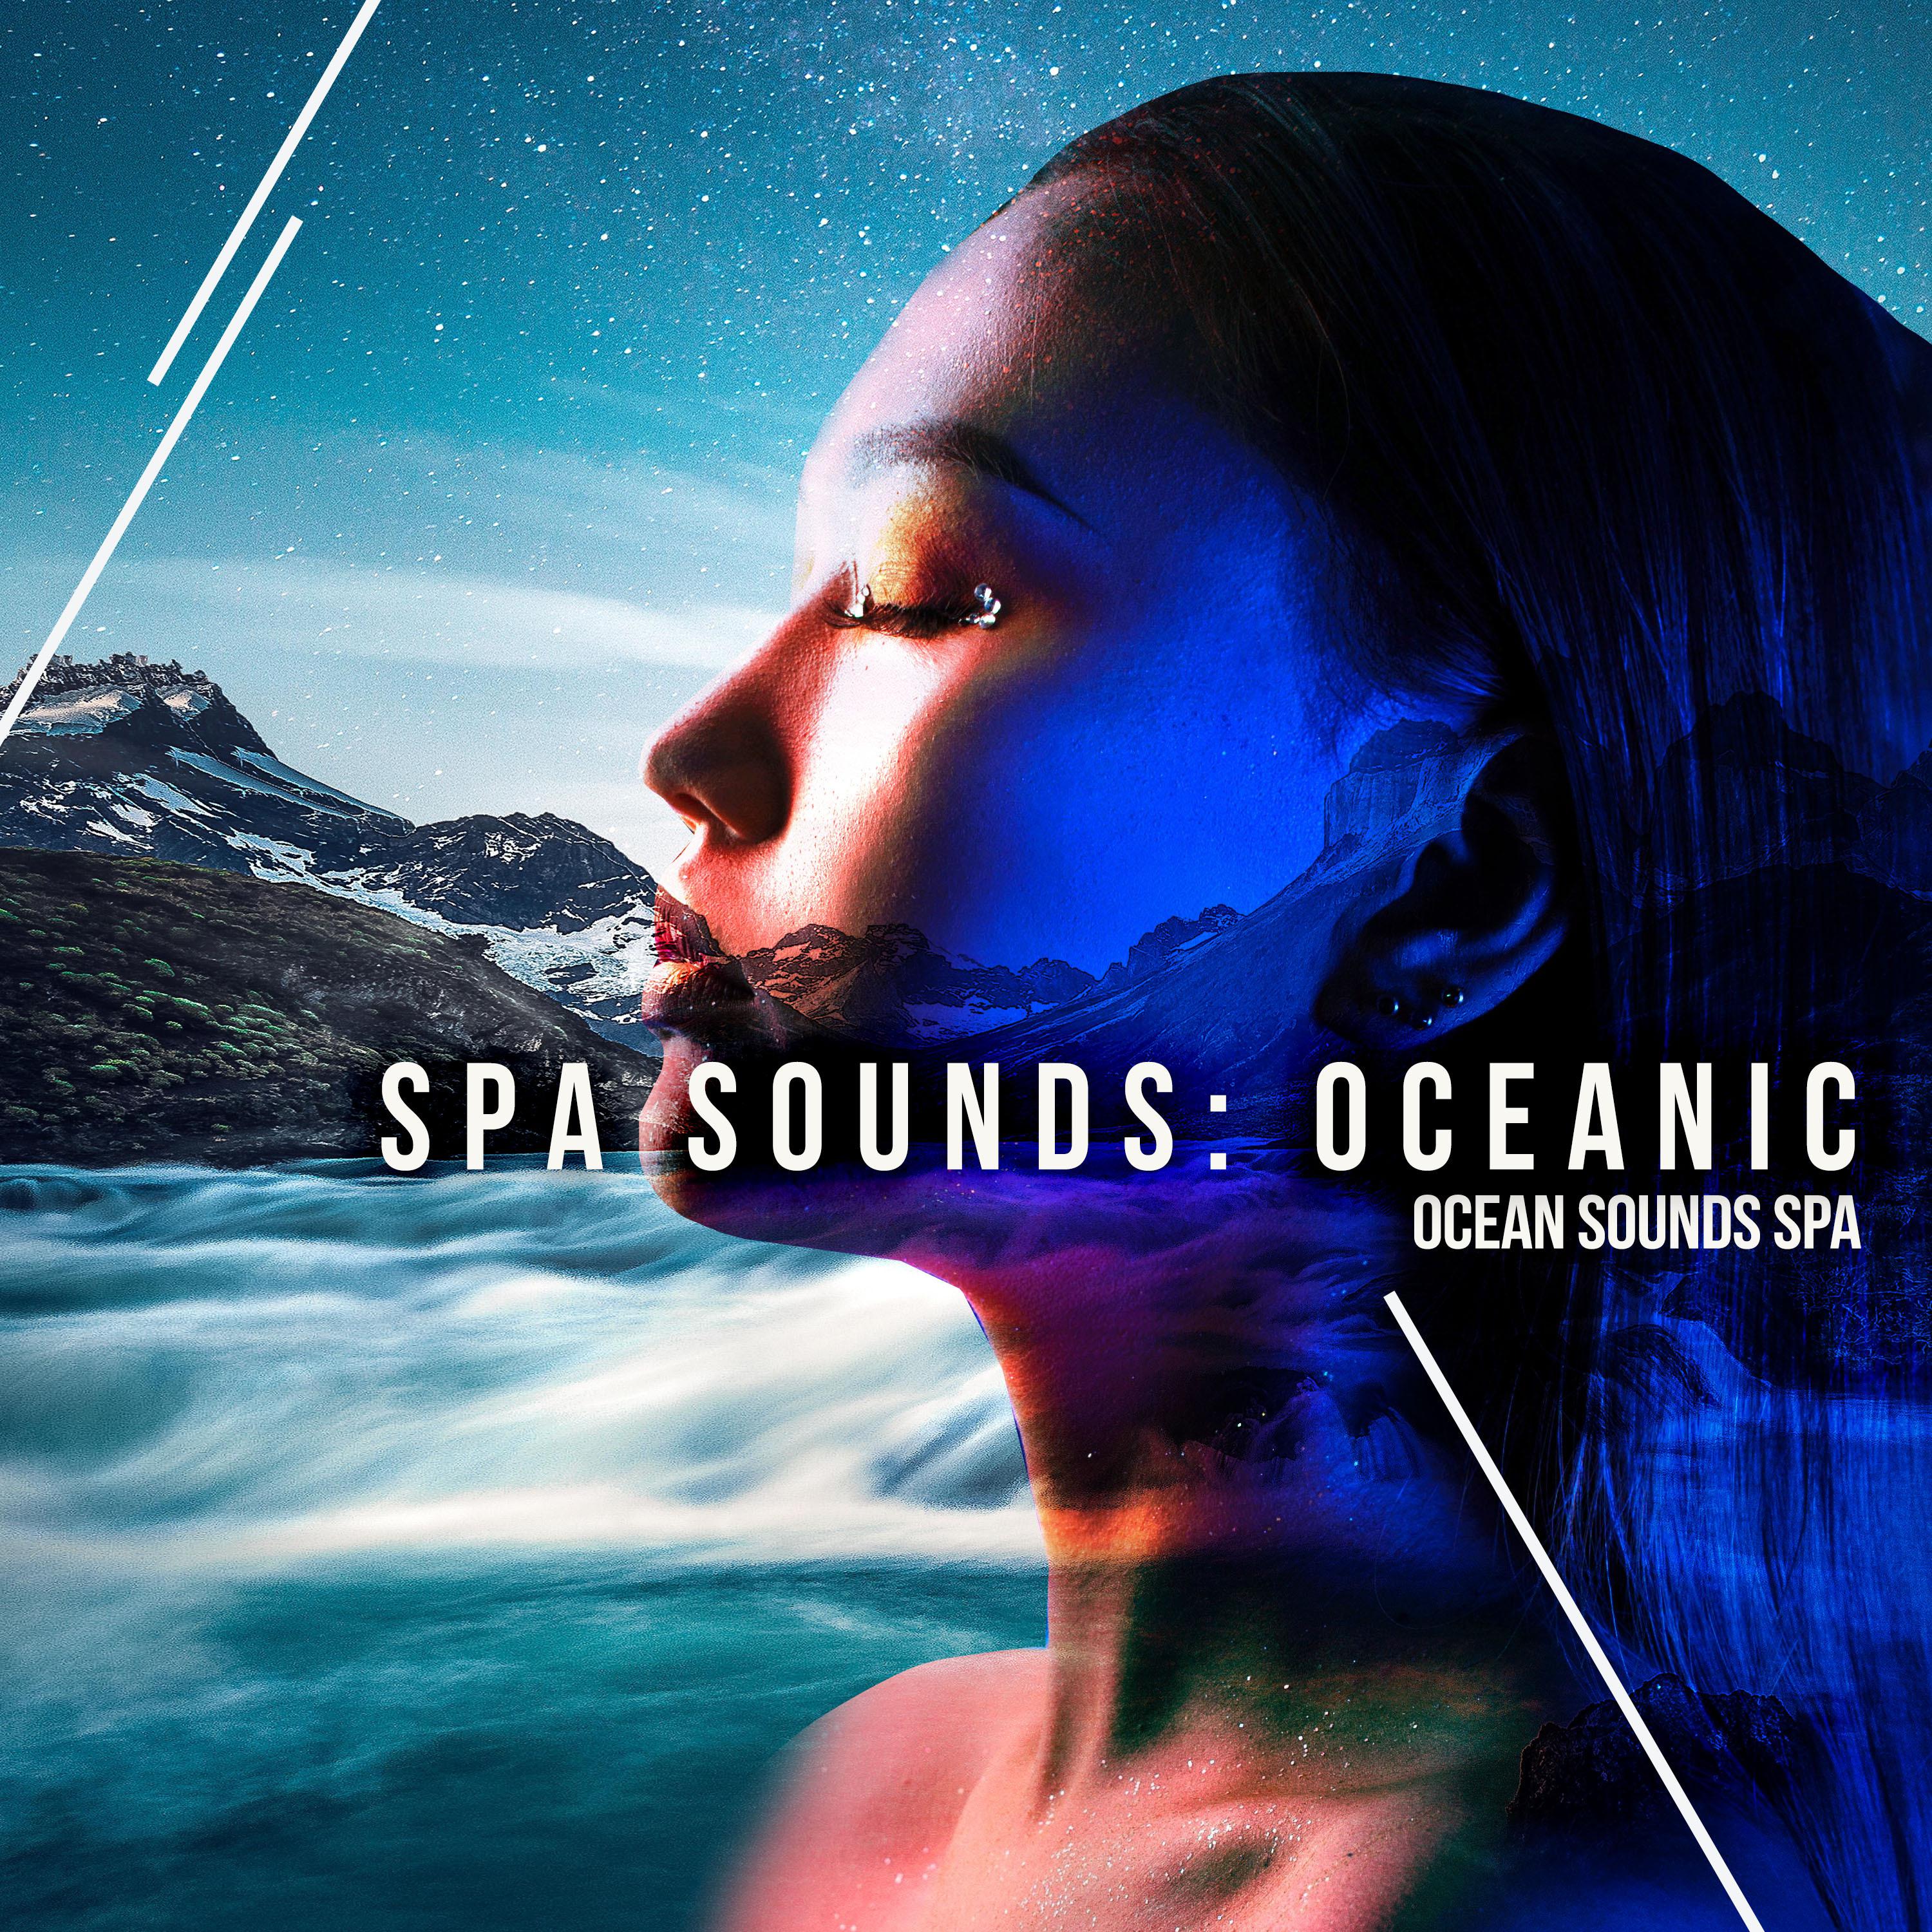 Spa Sounds: Oceanic